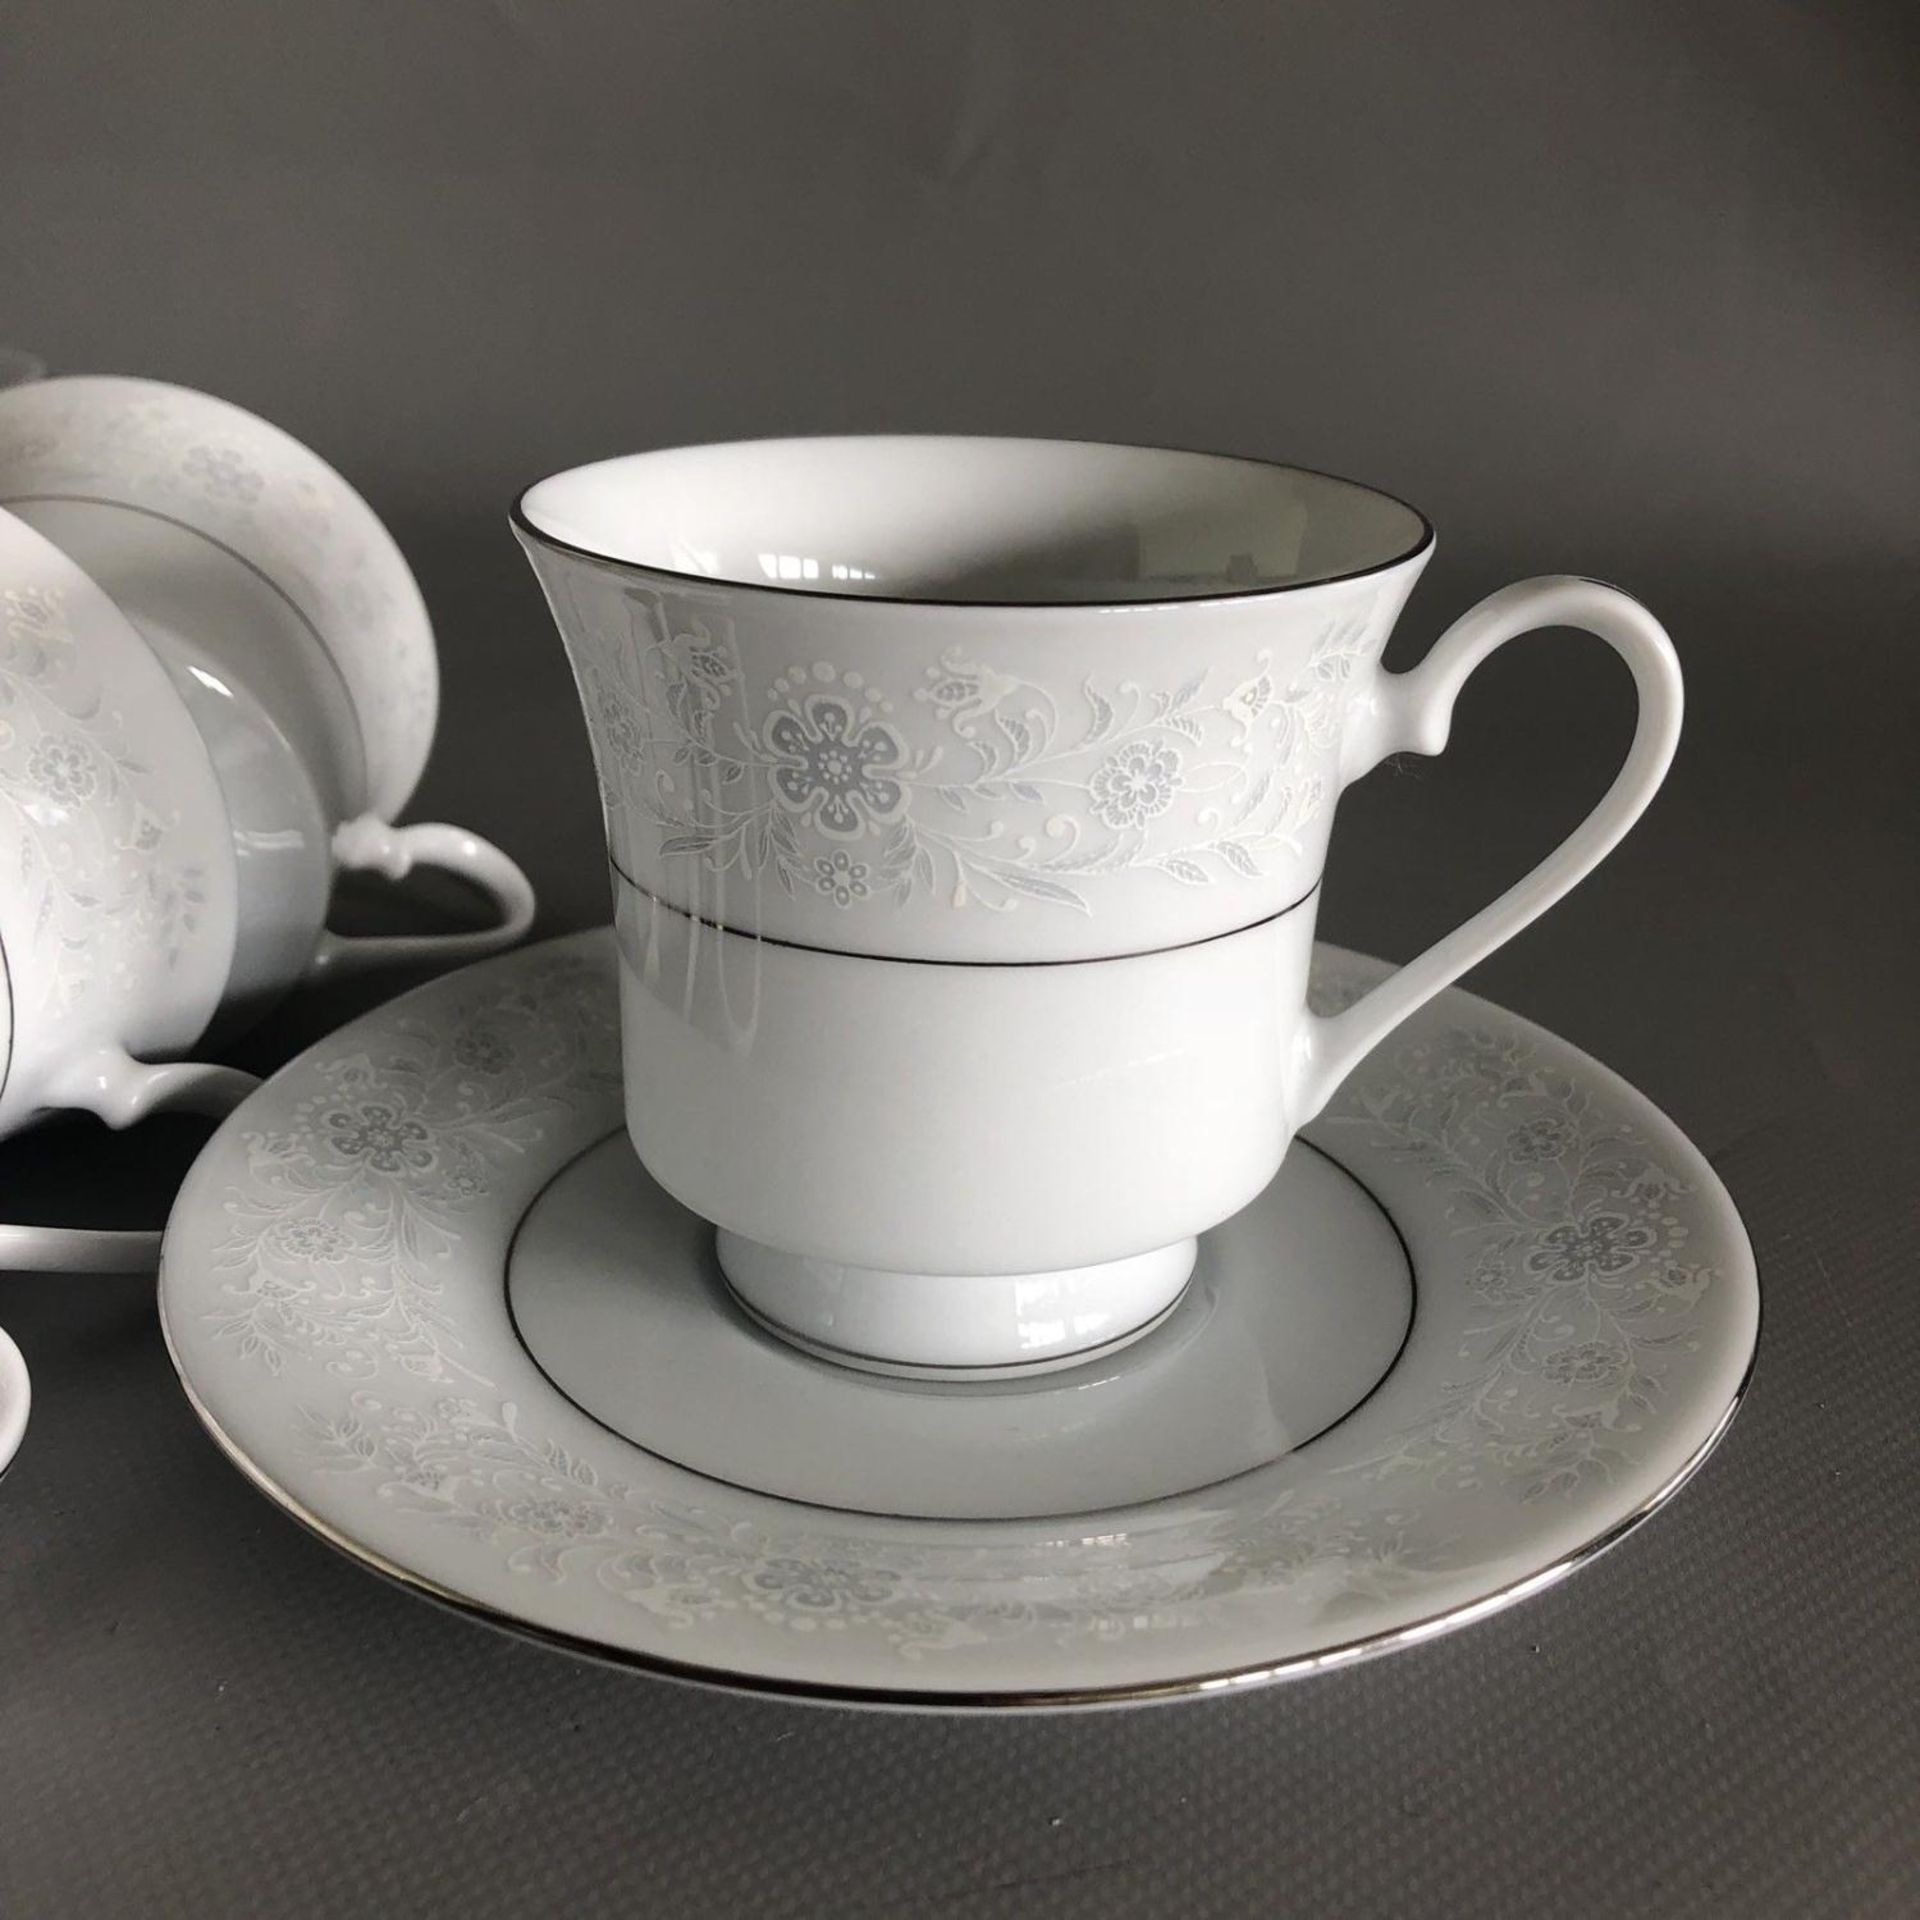 Beautiful Fine China Trios Set x 6 coffee tea cups saucers plates in WHITE/GREY - Image 4 of 7